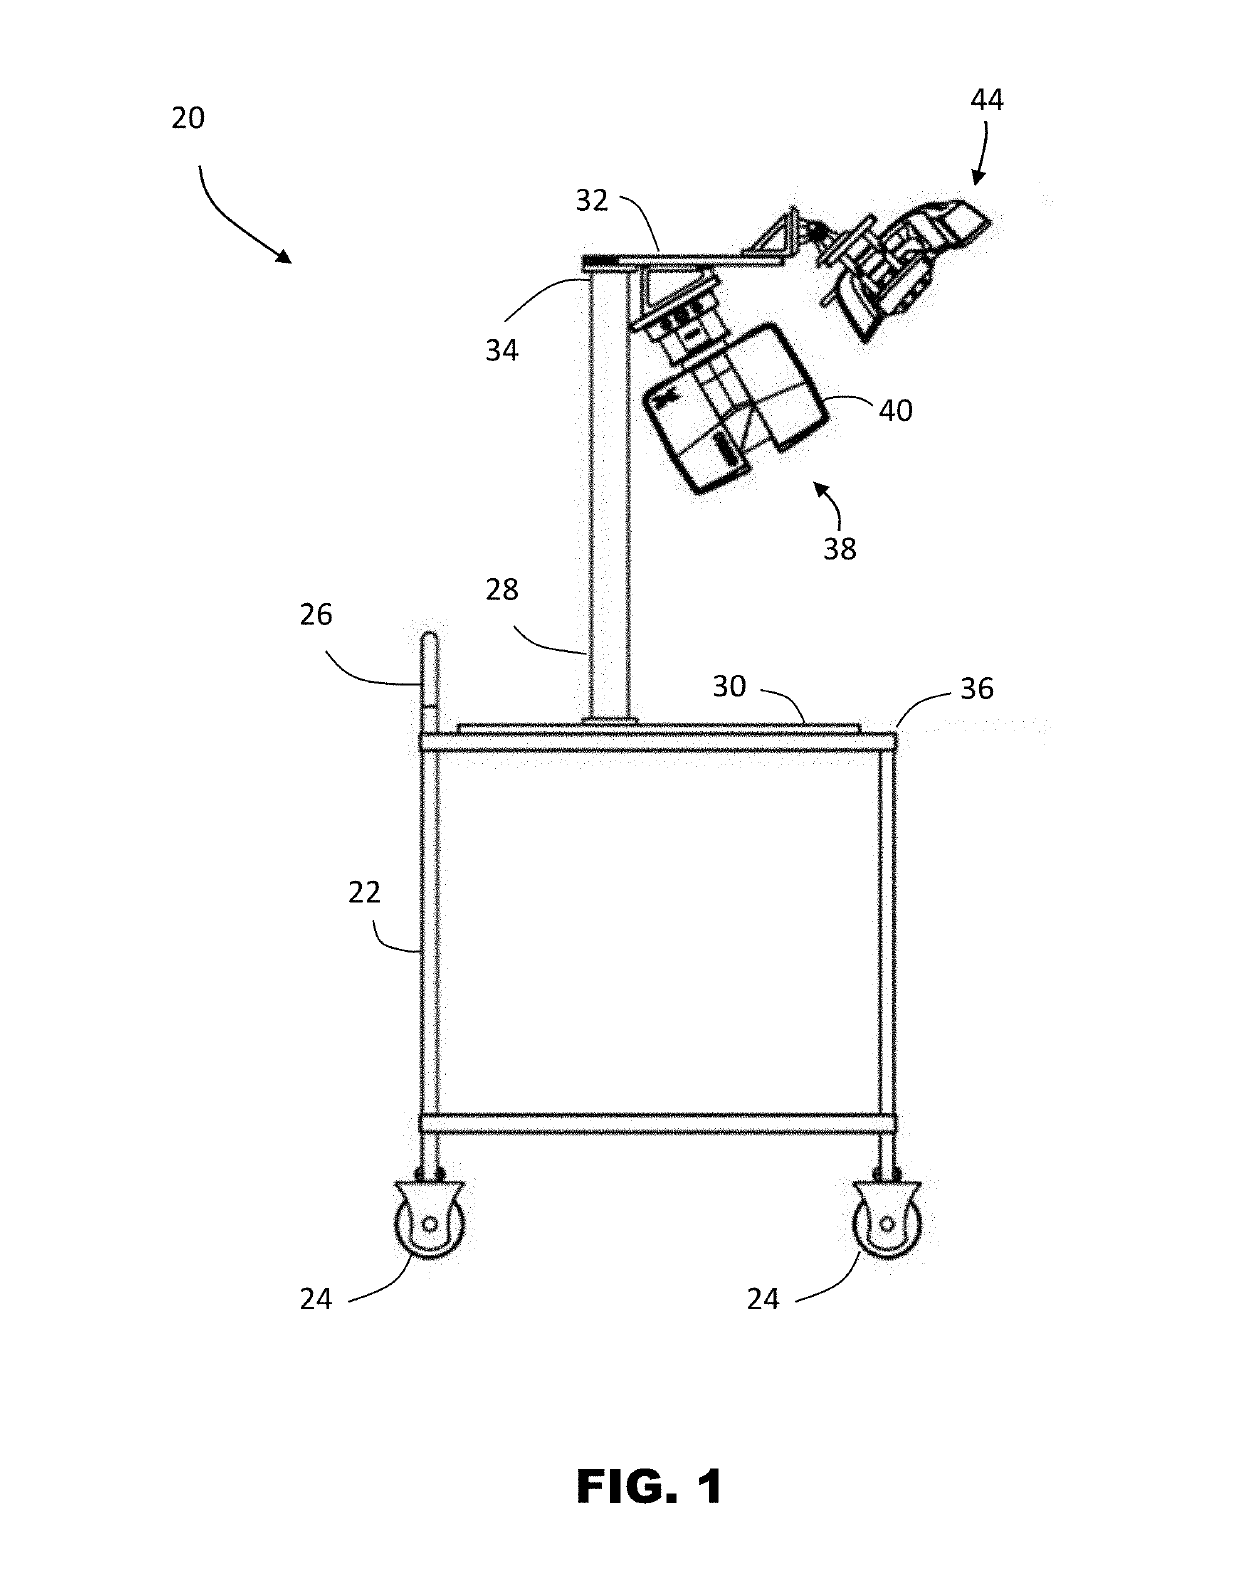 Device and method for indoor mobile mapping of an environment